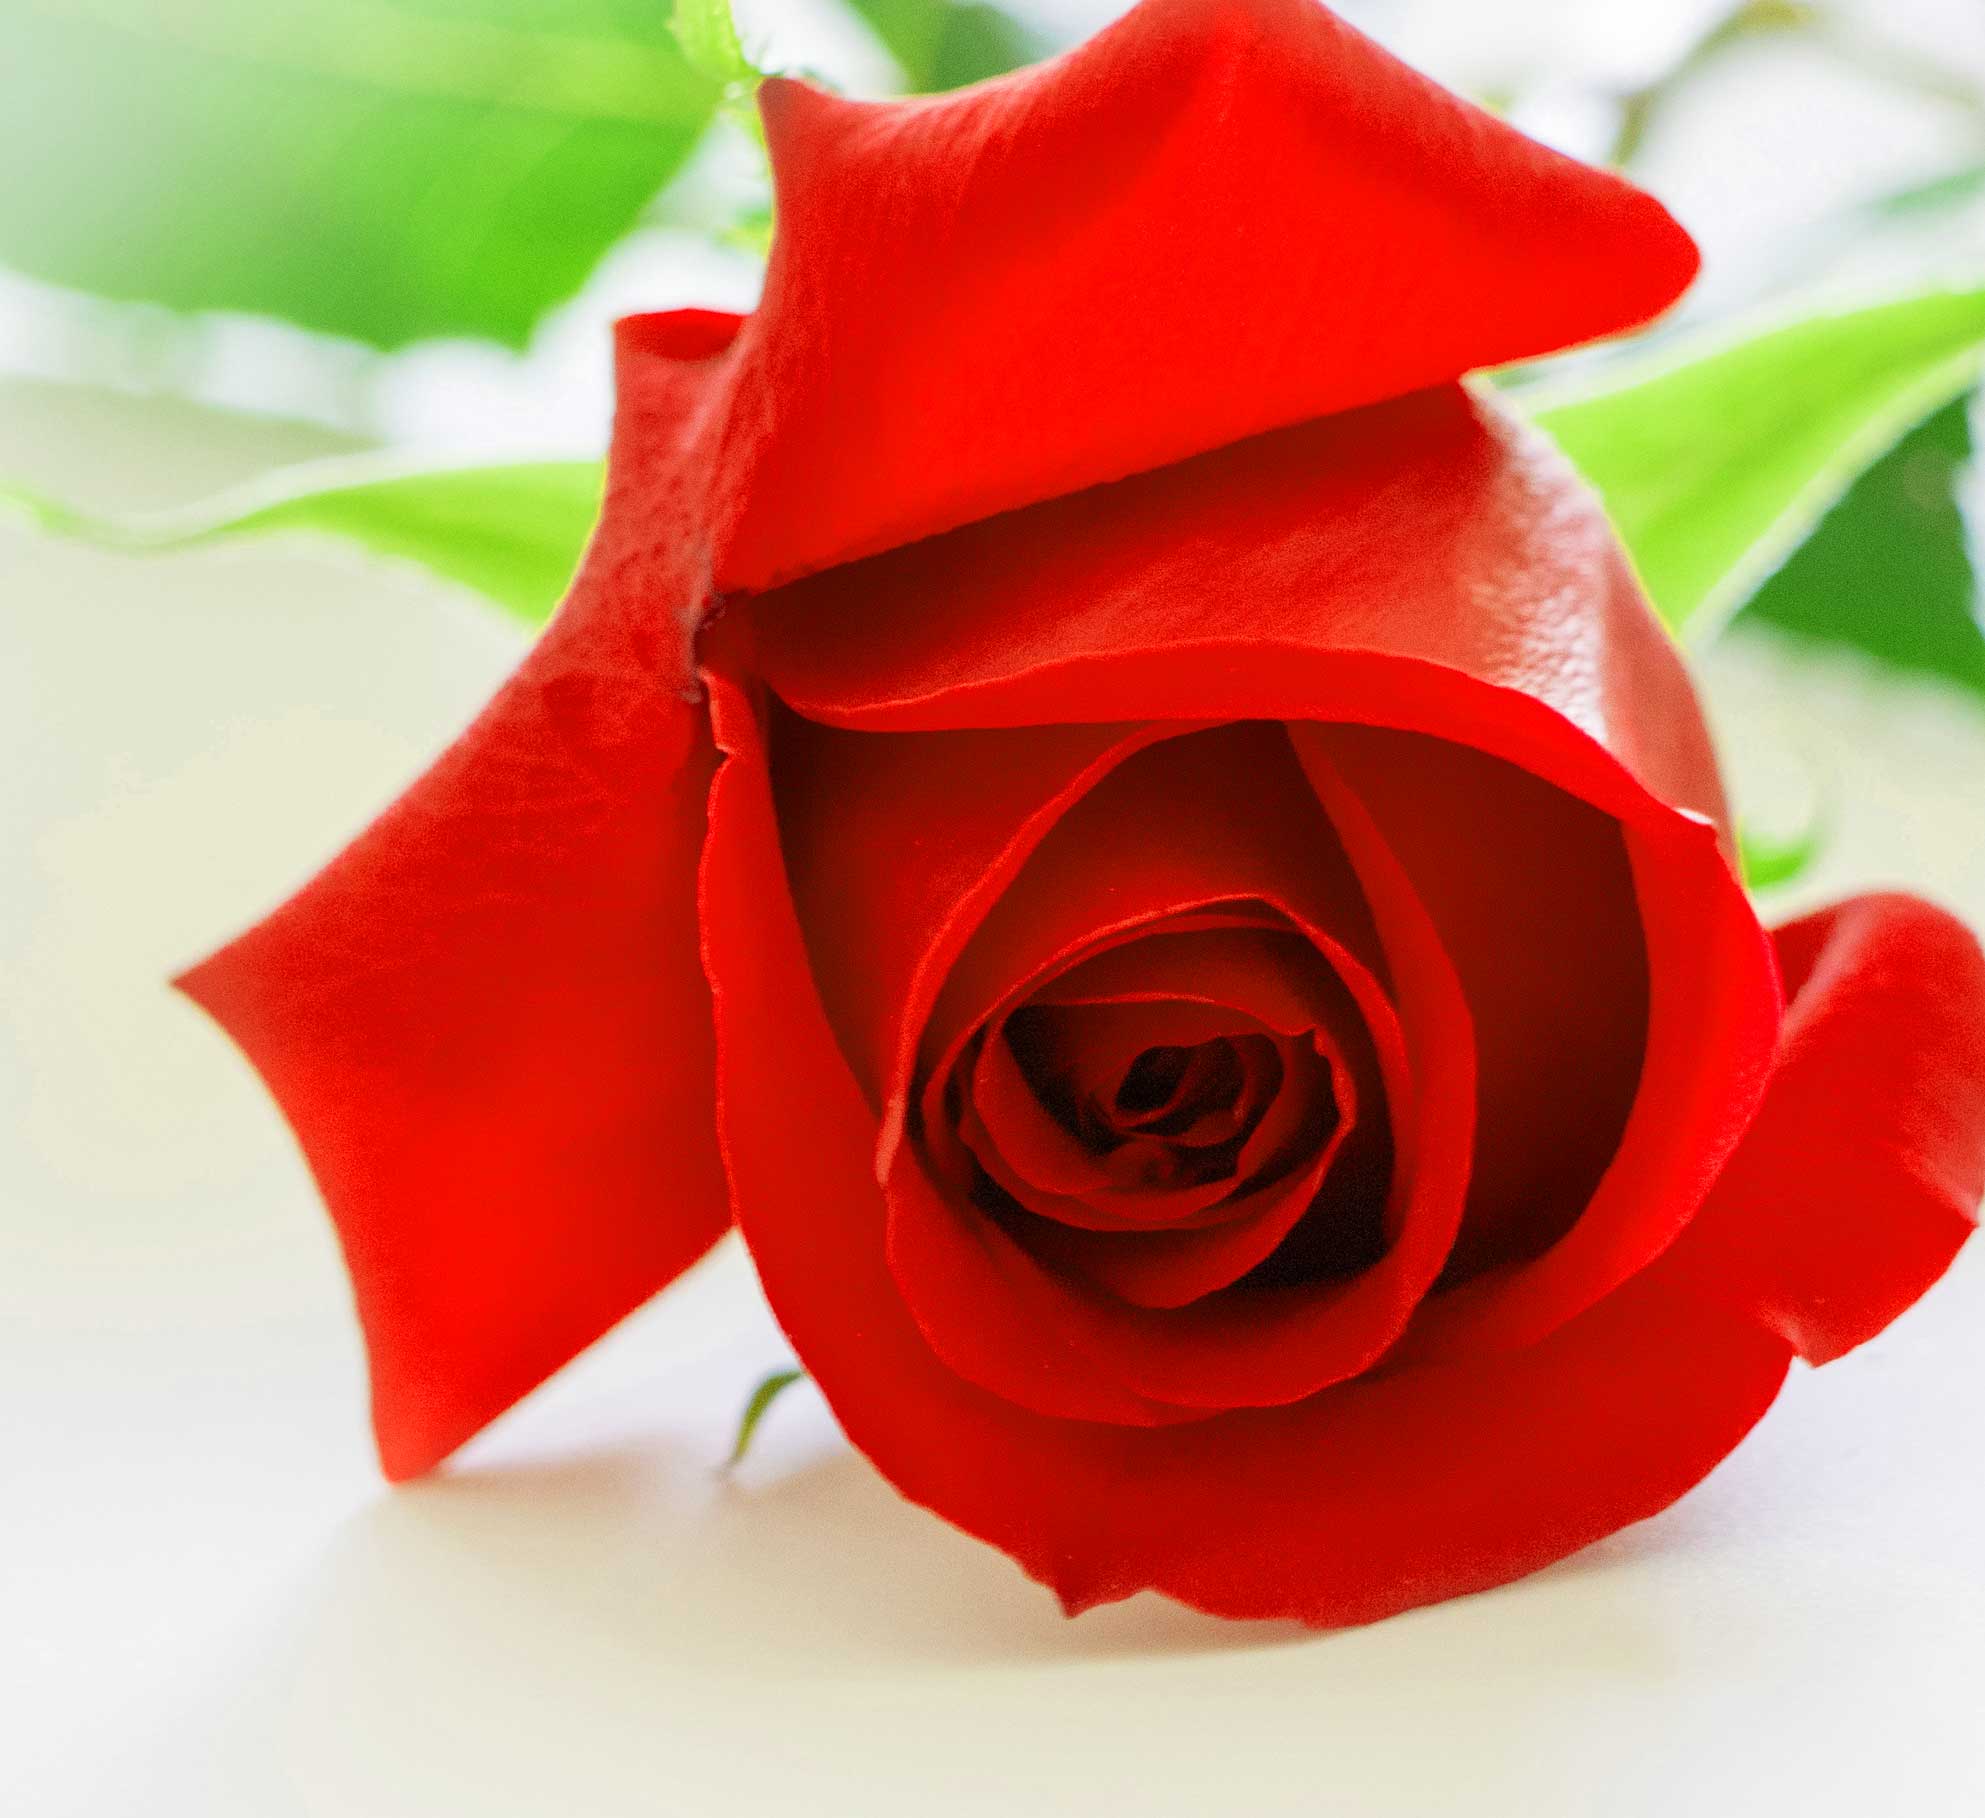 Best Flower For ProFile Pics Images